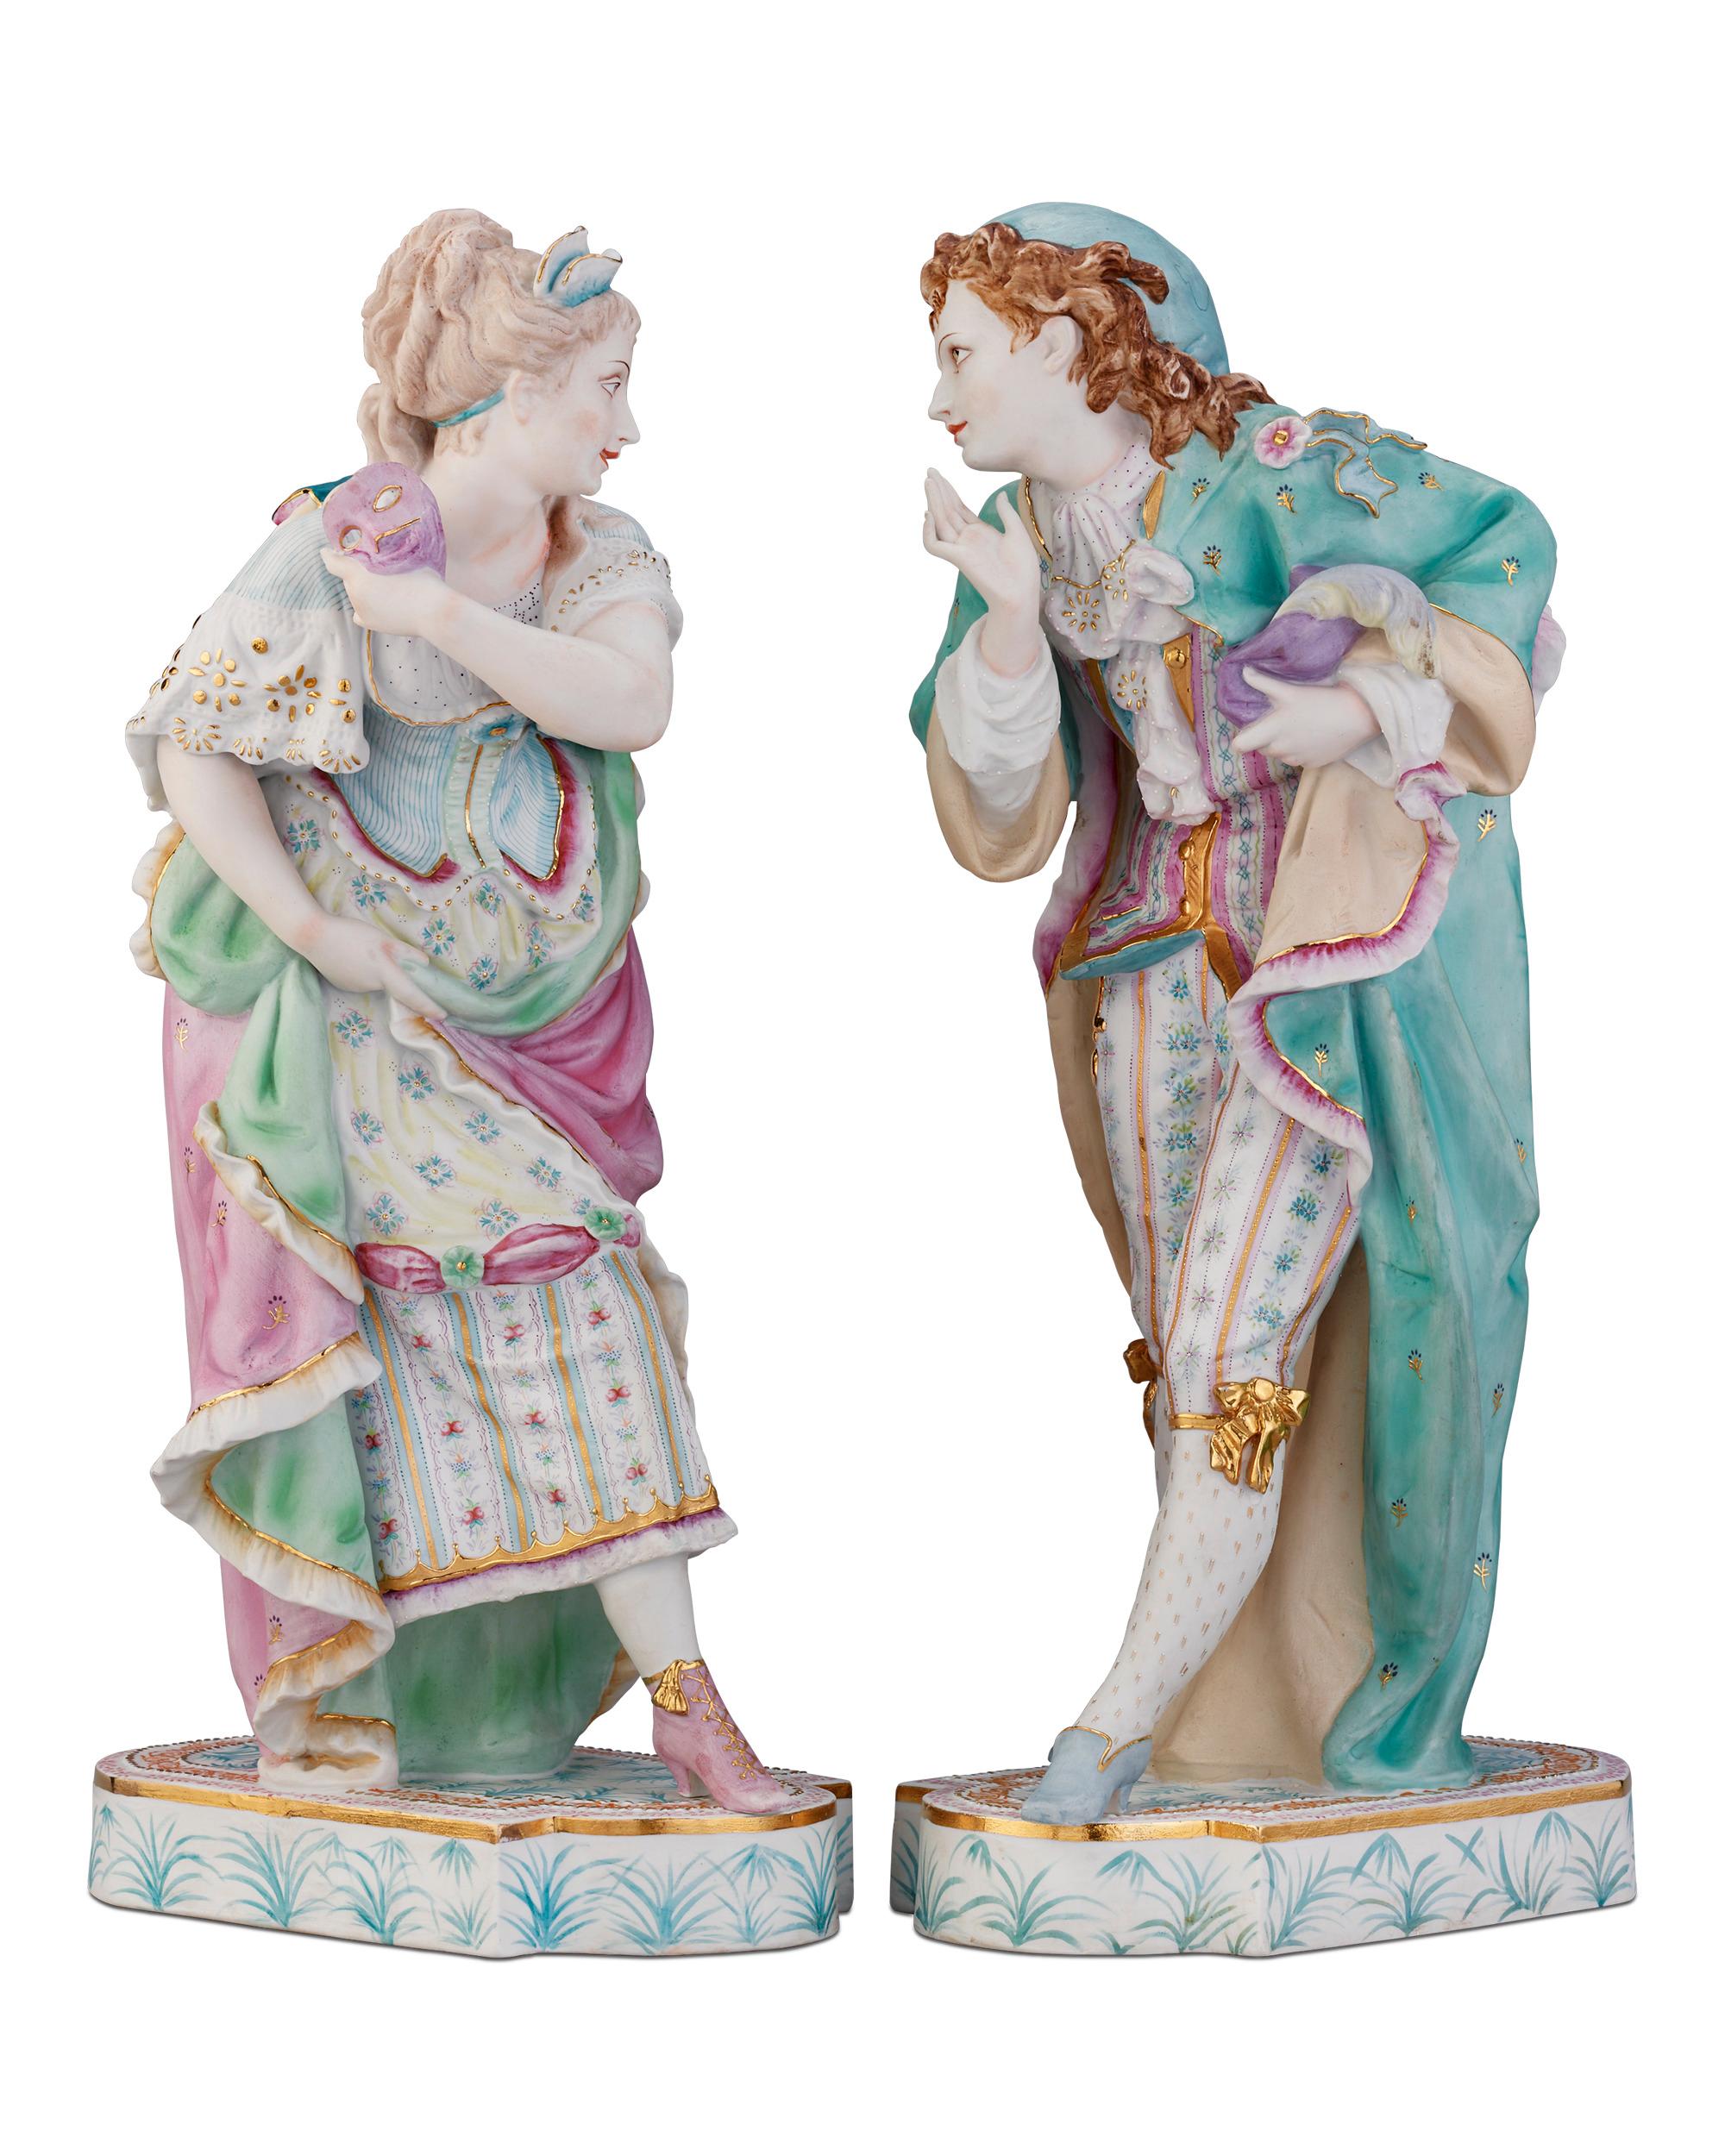 This splendid bisque porcelain figural group depicting a lavishly-dressed couple is crafted in the manner of Jean Gille. The lively pair are dressed for a masquerade ball complete with colorful costumes and masks. Their clothing is painted in soft